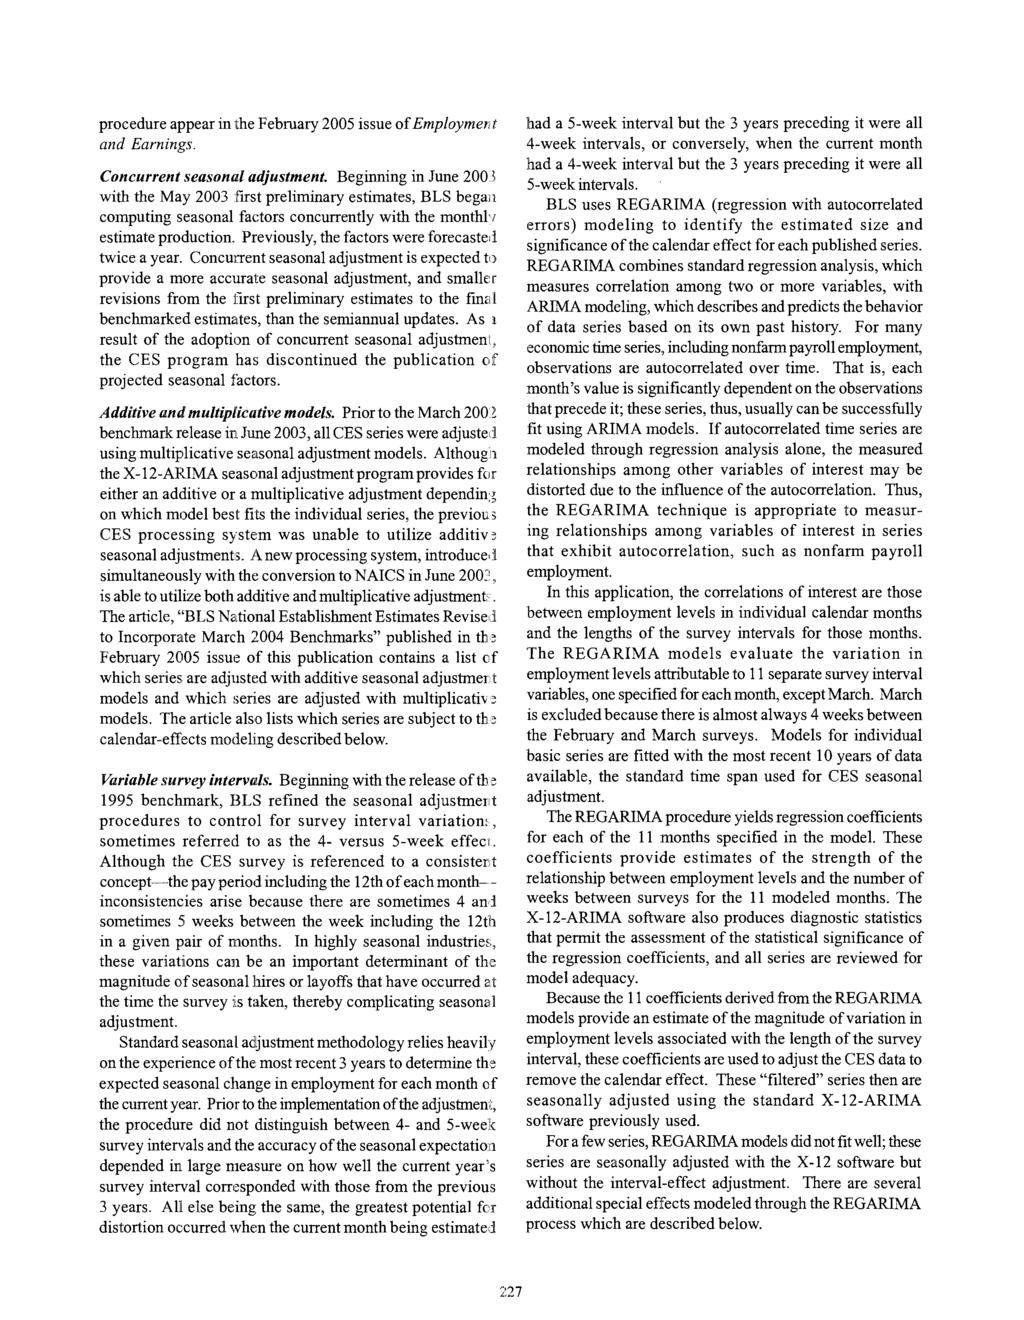 procedure appear in the February 2005 issue of Employment and Earnings.